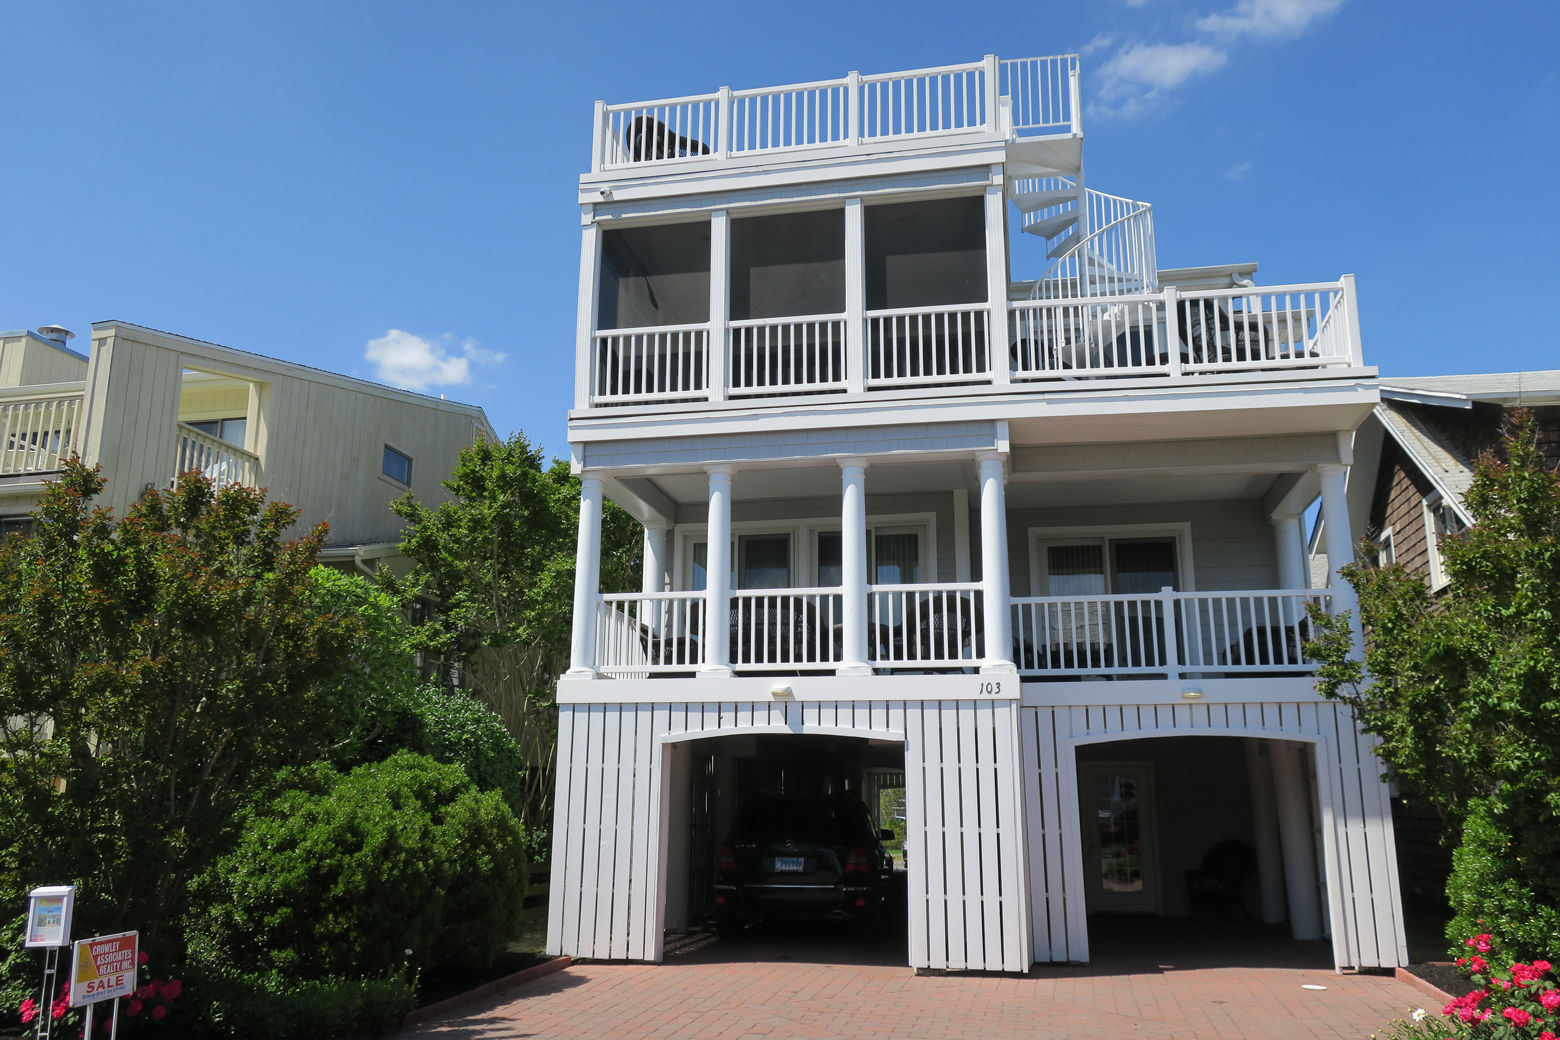 Photo shows a Bethany Beach home with a spiral staircase